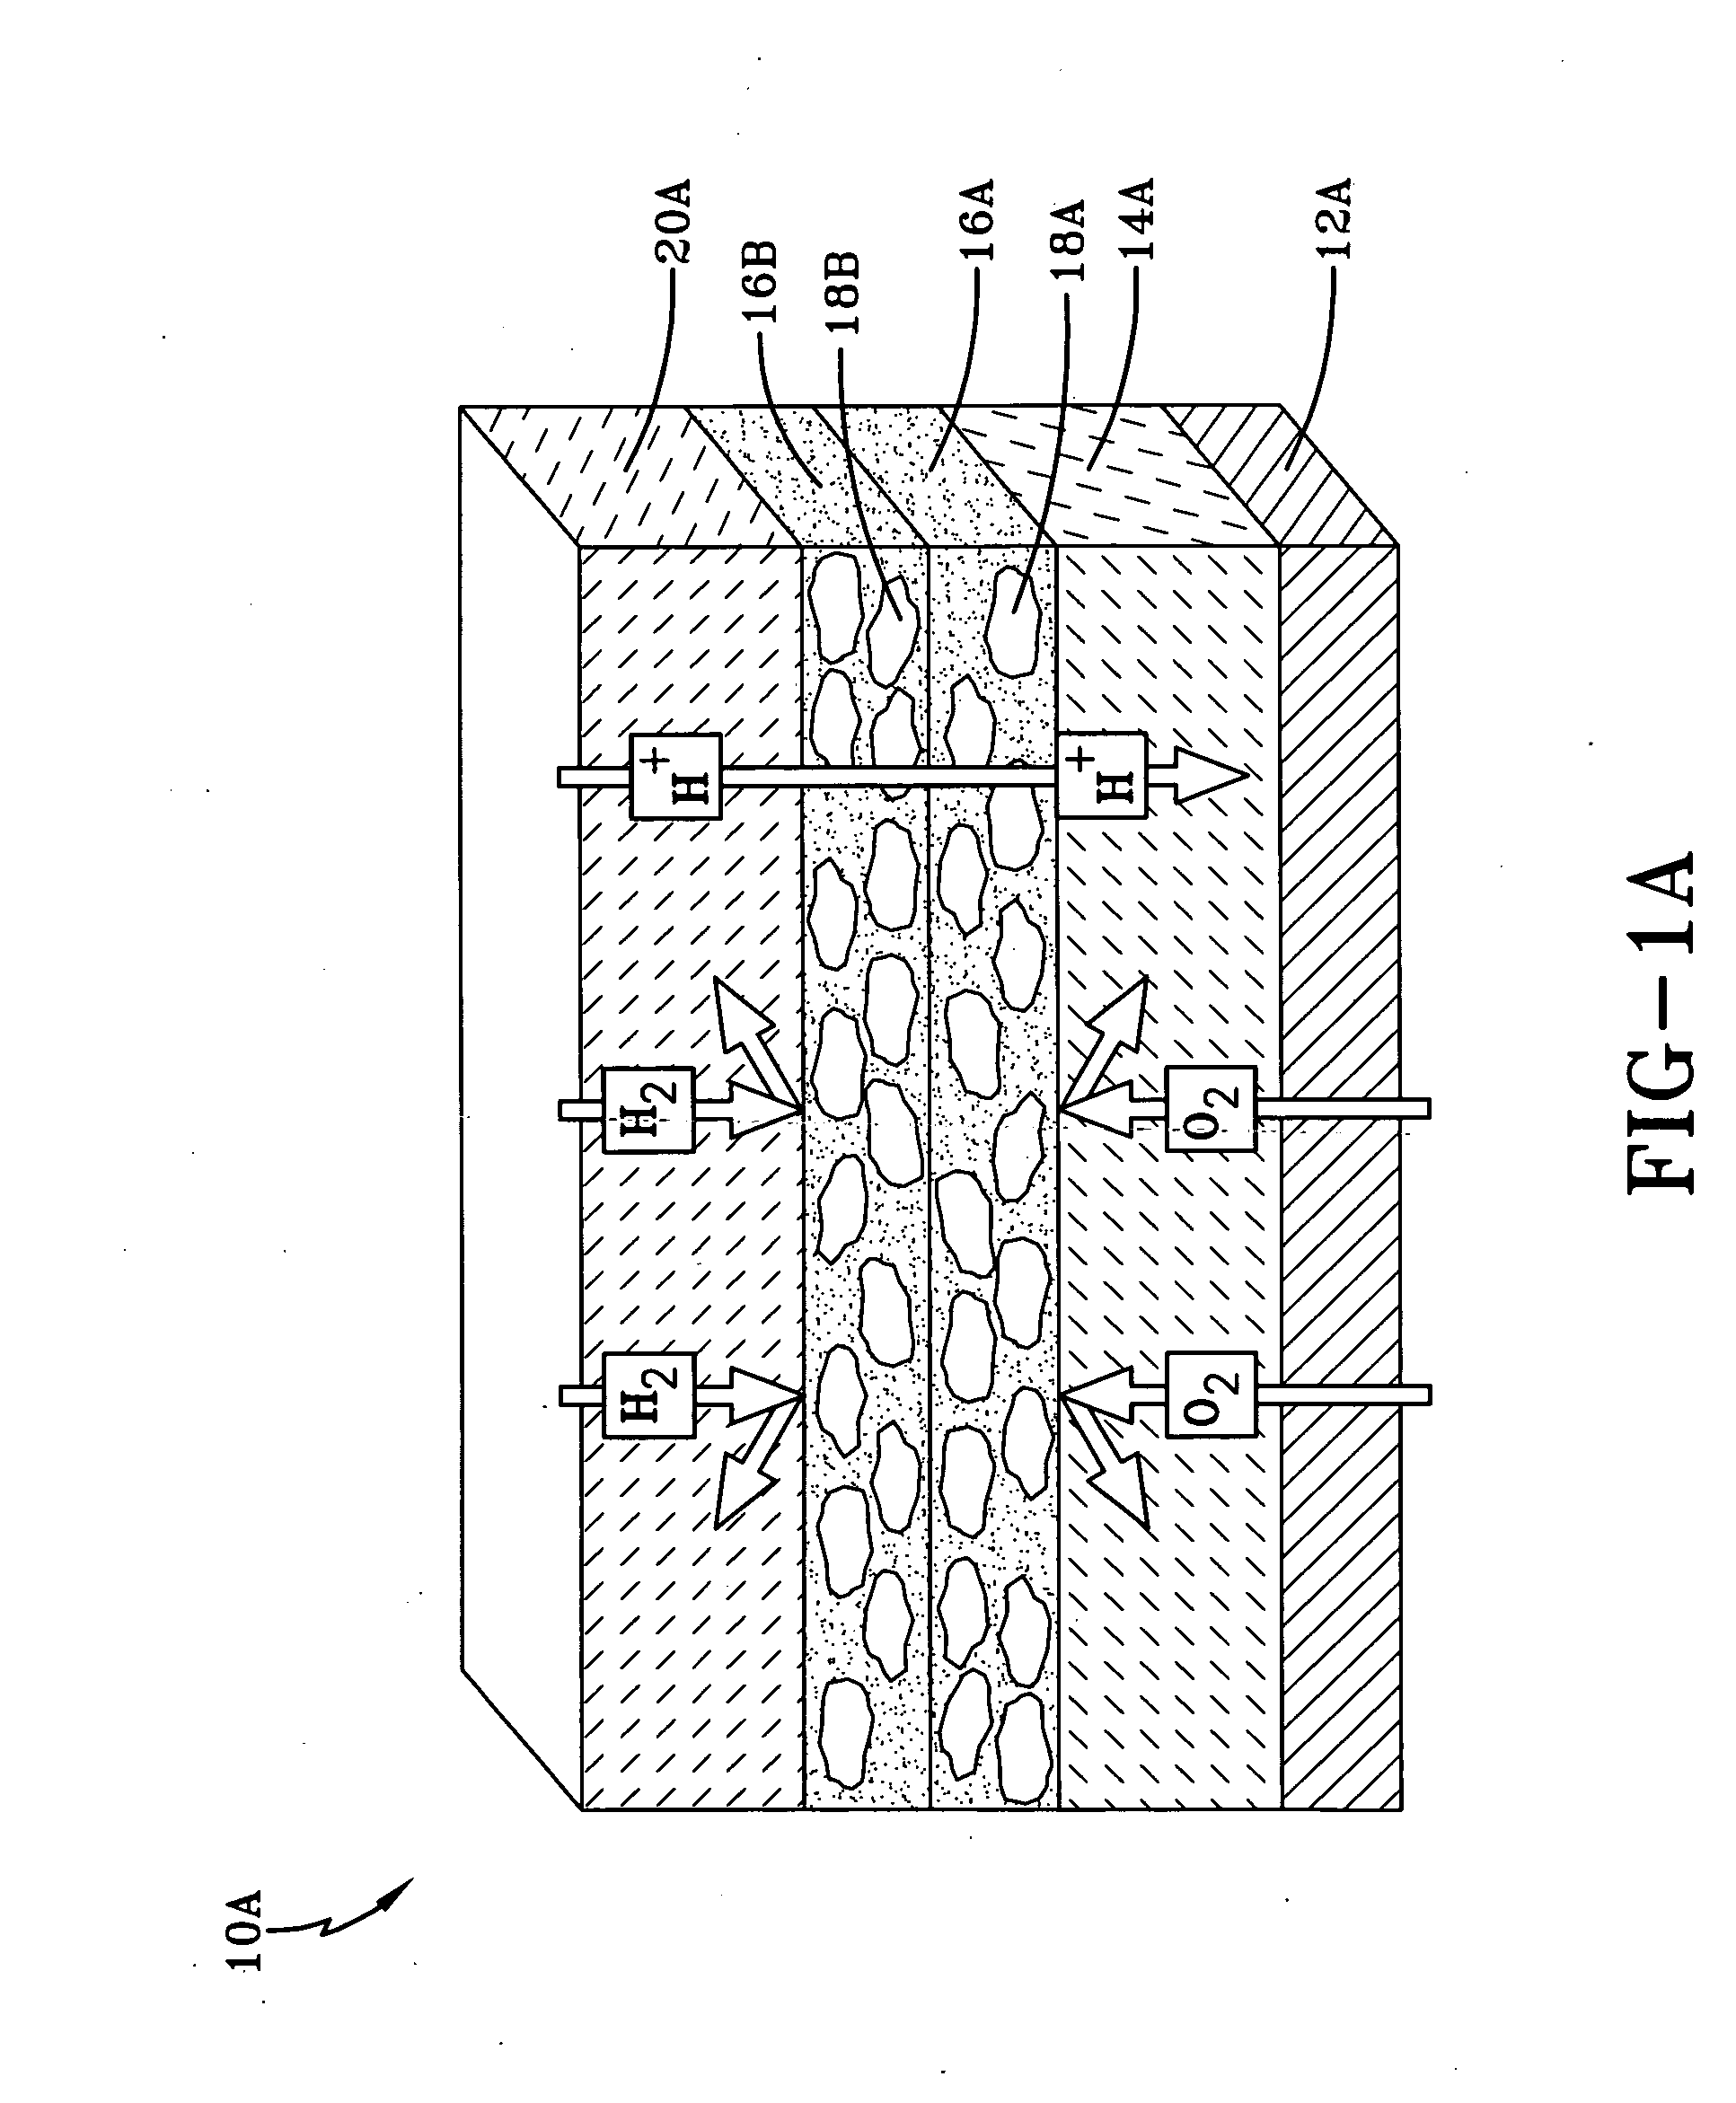 Multilayered composite proton exchange membrane and a process for manufacturing the same